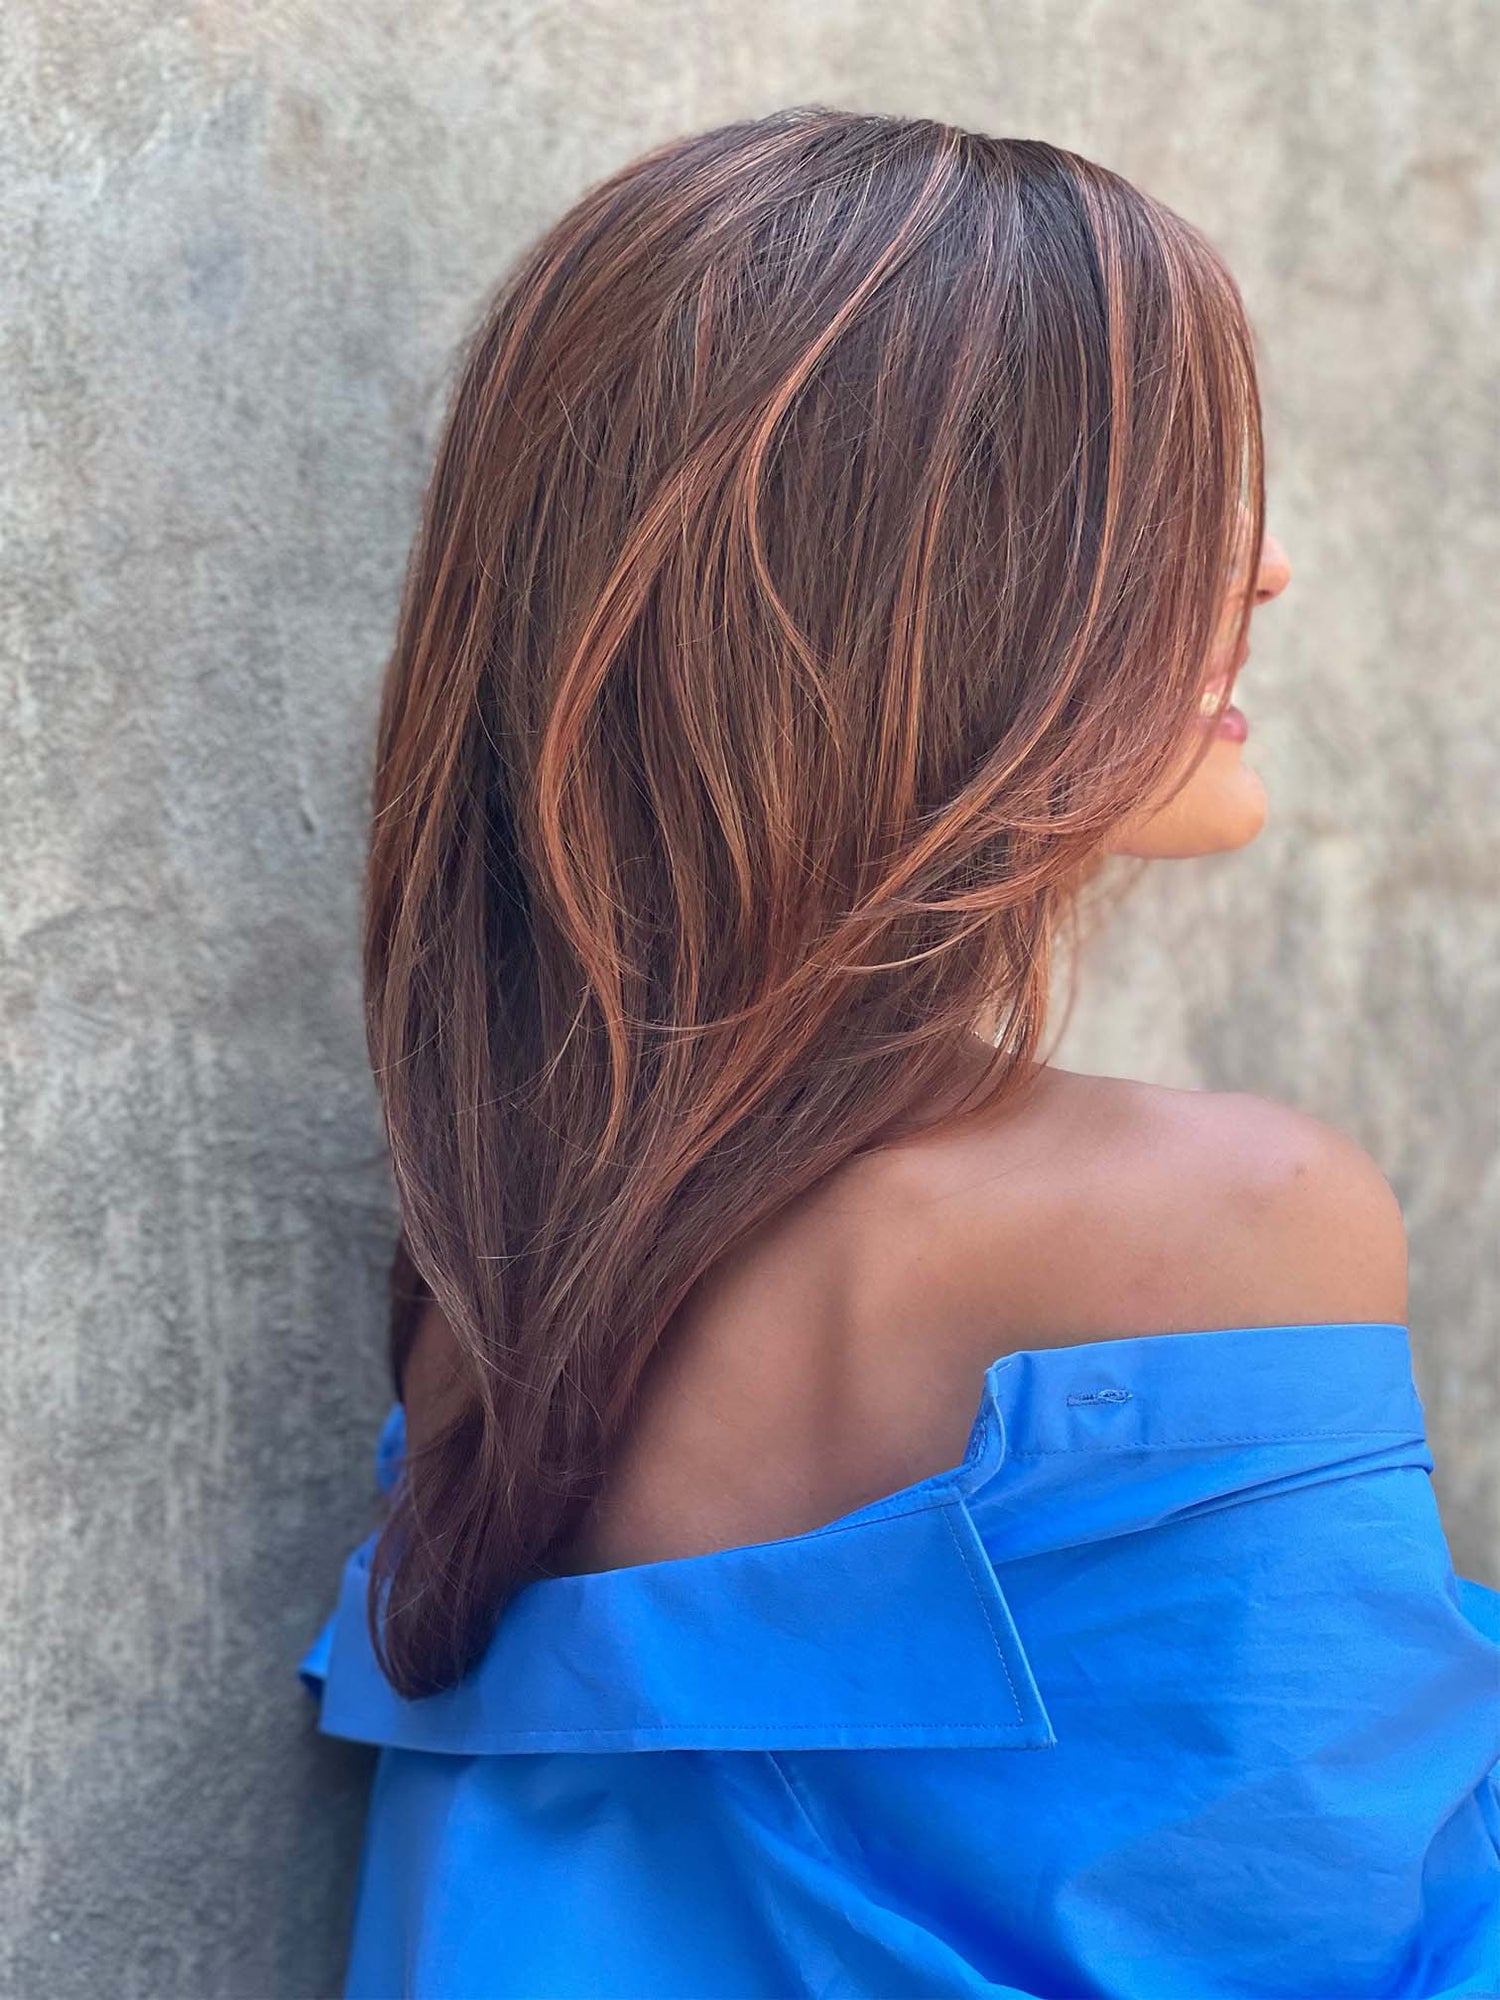 MUSIC by ELLEN WILLE in CINNAMON BROWN ROOTED 33.30.6 | Dark Auburn, Light Auburn and Dark Brown Blend with Shaded Roots